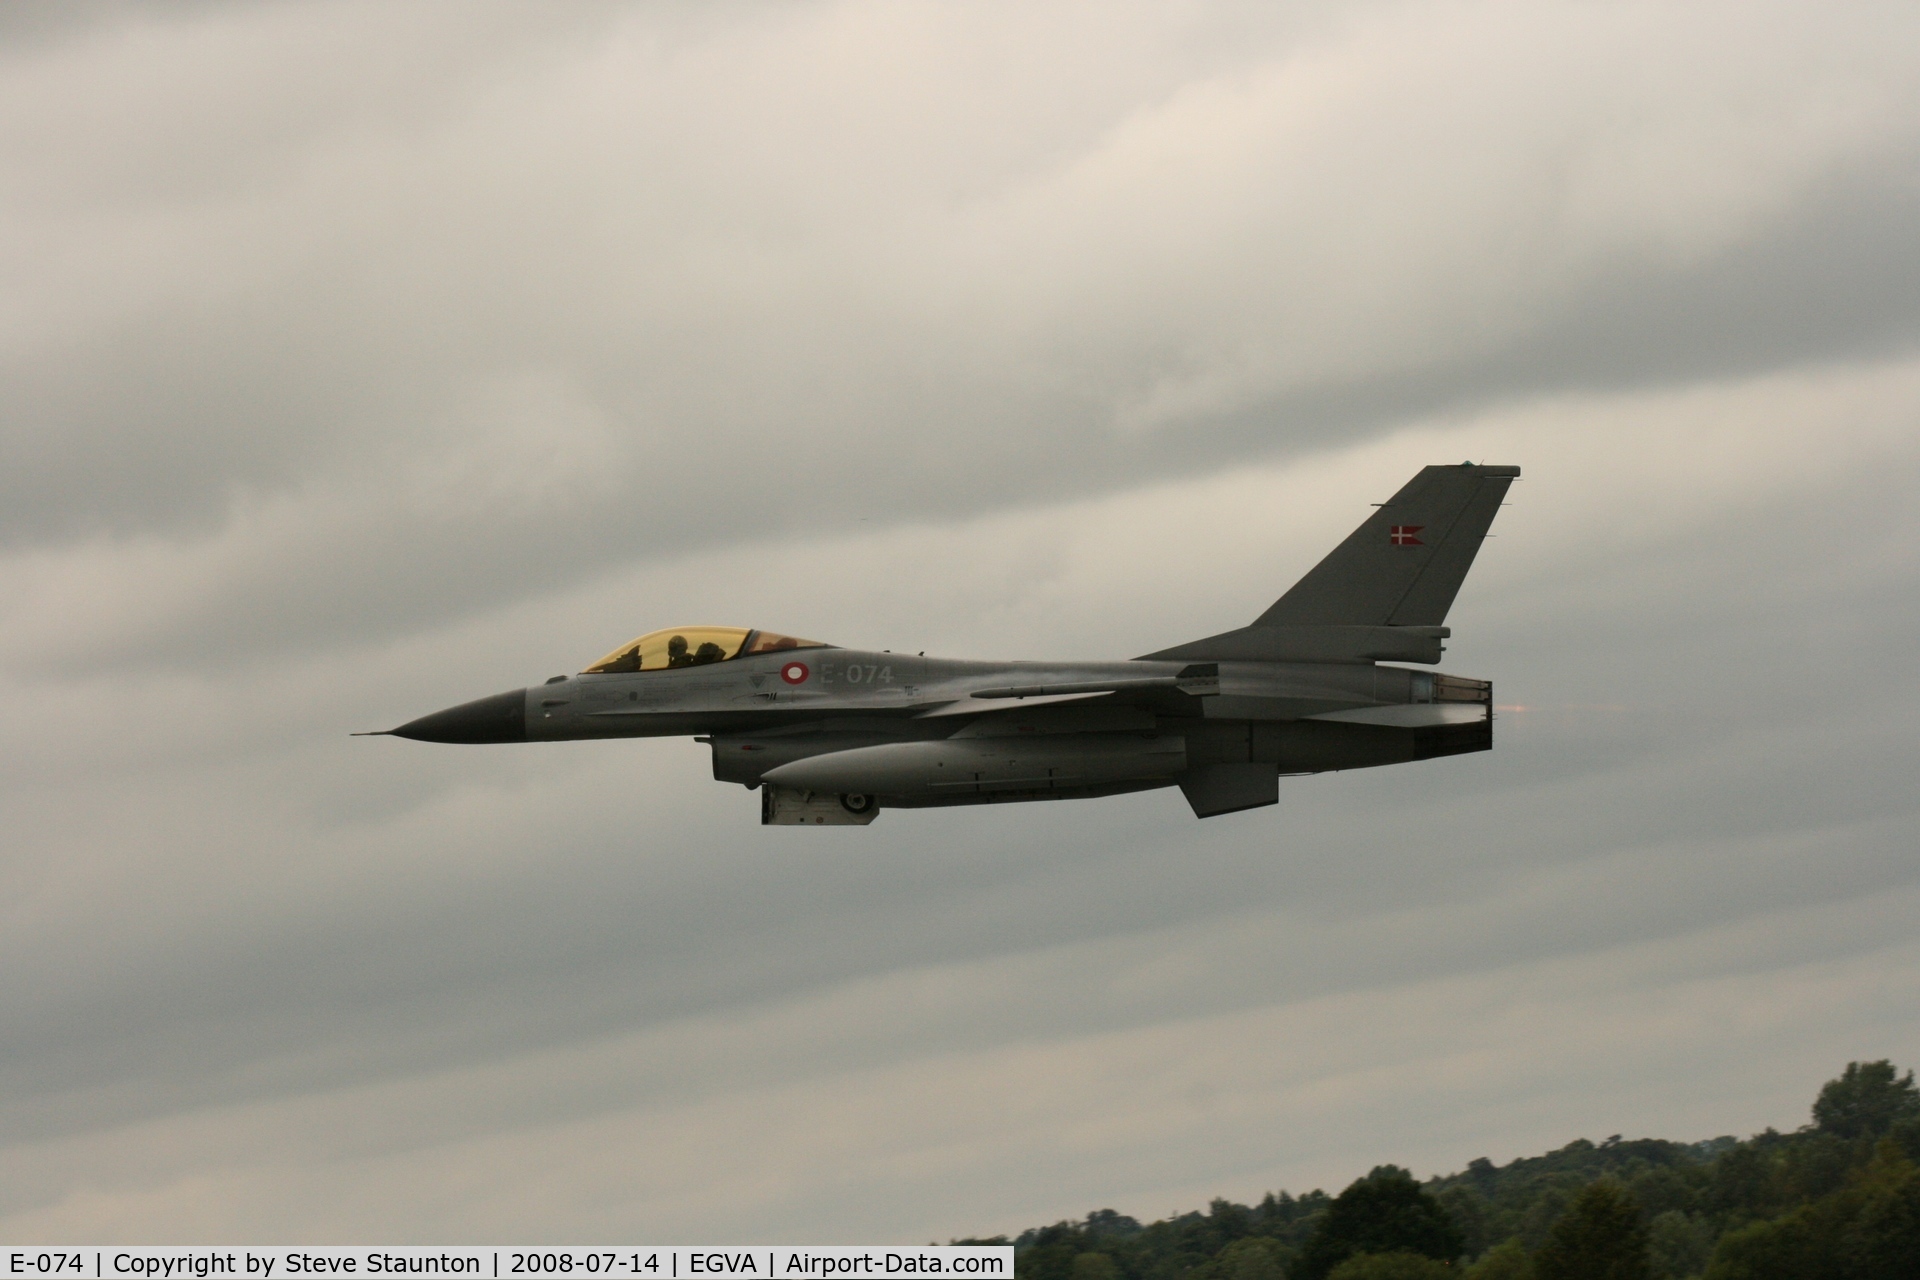 E-074, General Dynamics F-16AM Fighting Falcon C/N 61-627, Taken at the Royal International Air Tattoo 2008 during arrivals and departures (show days cancelled due to bad weather)